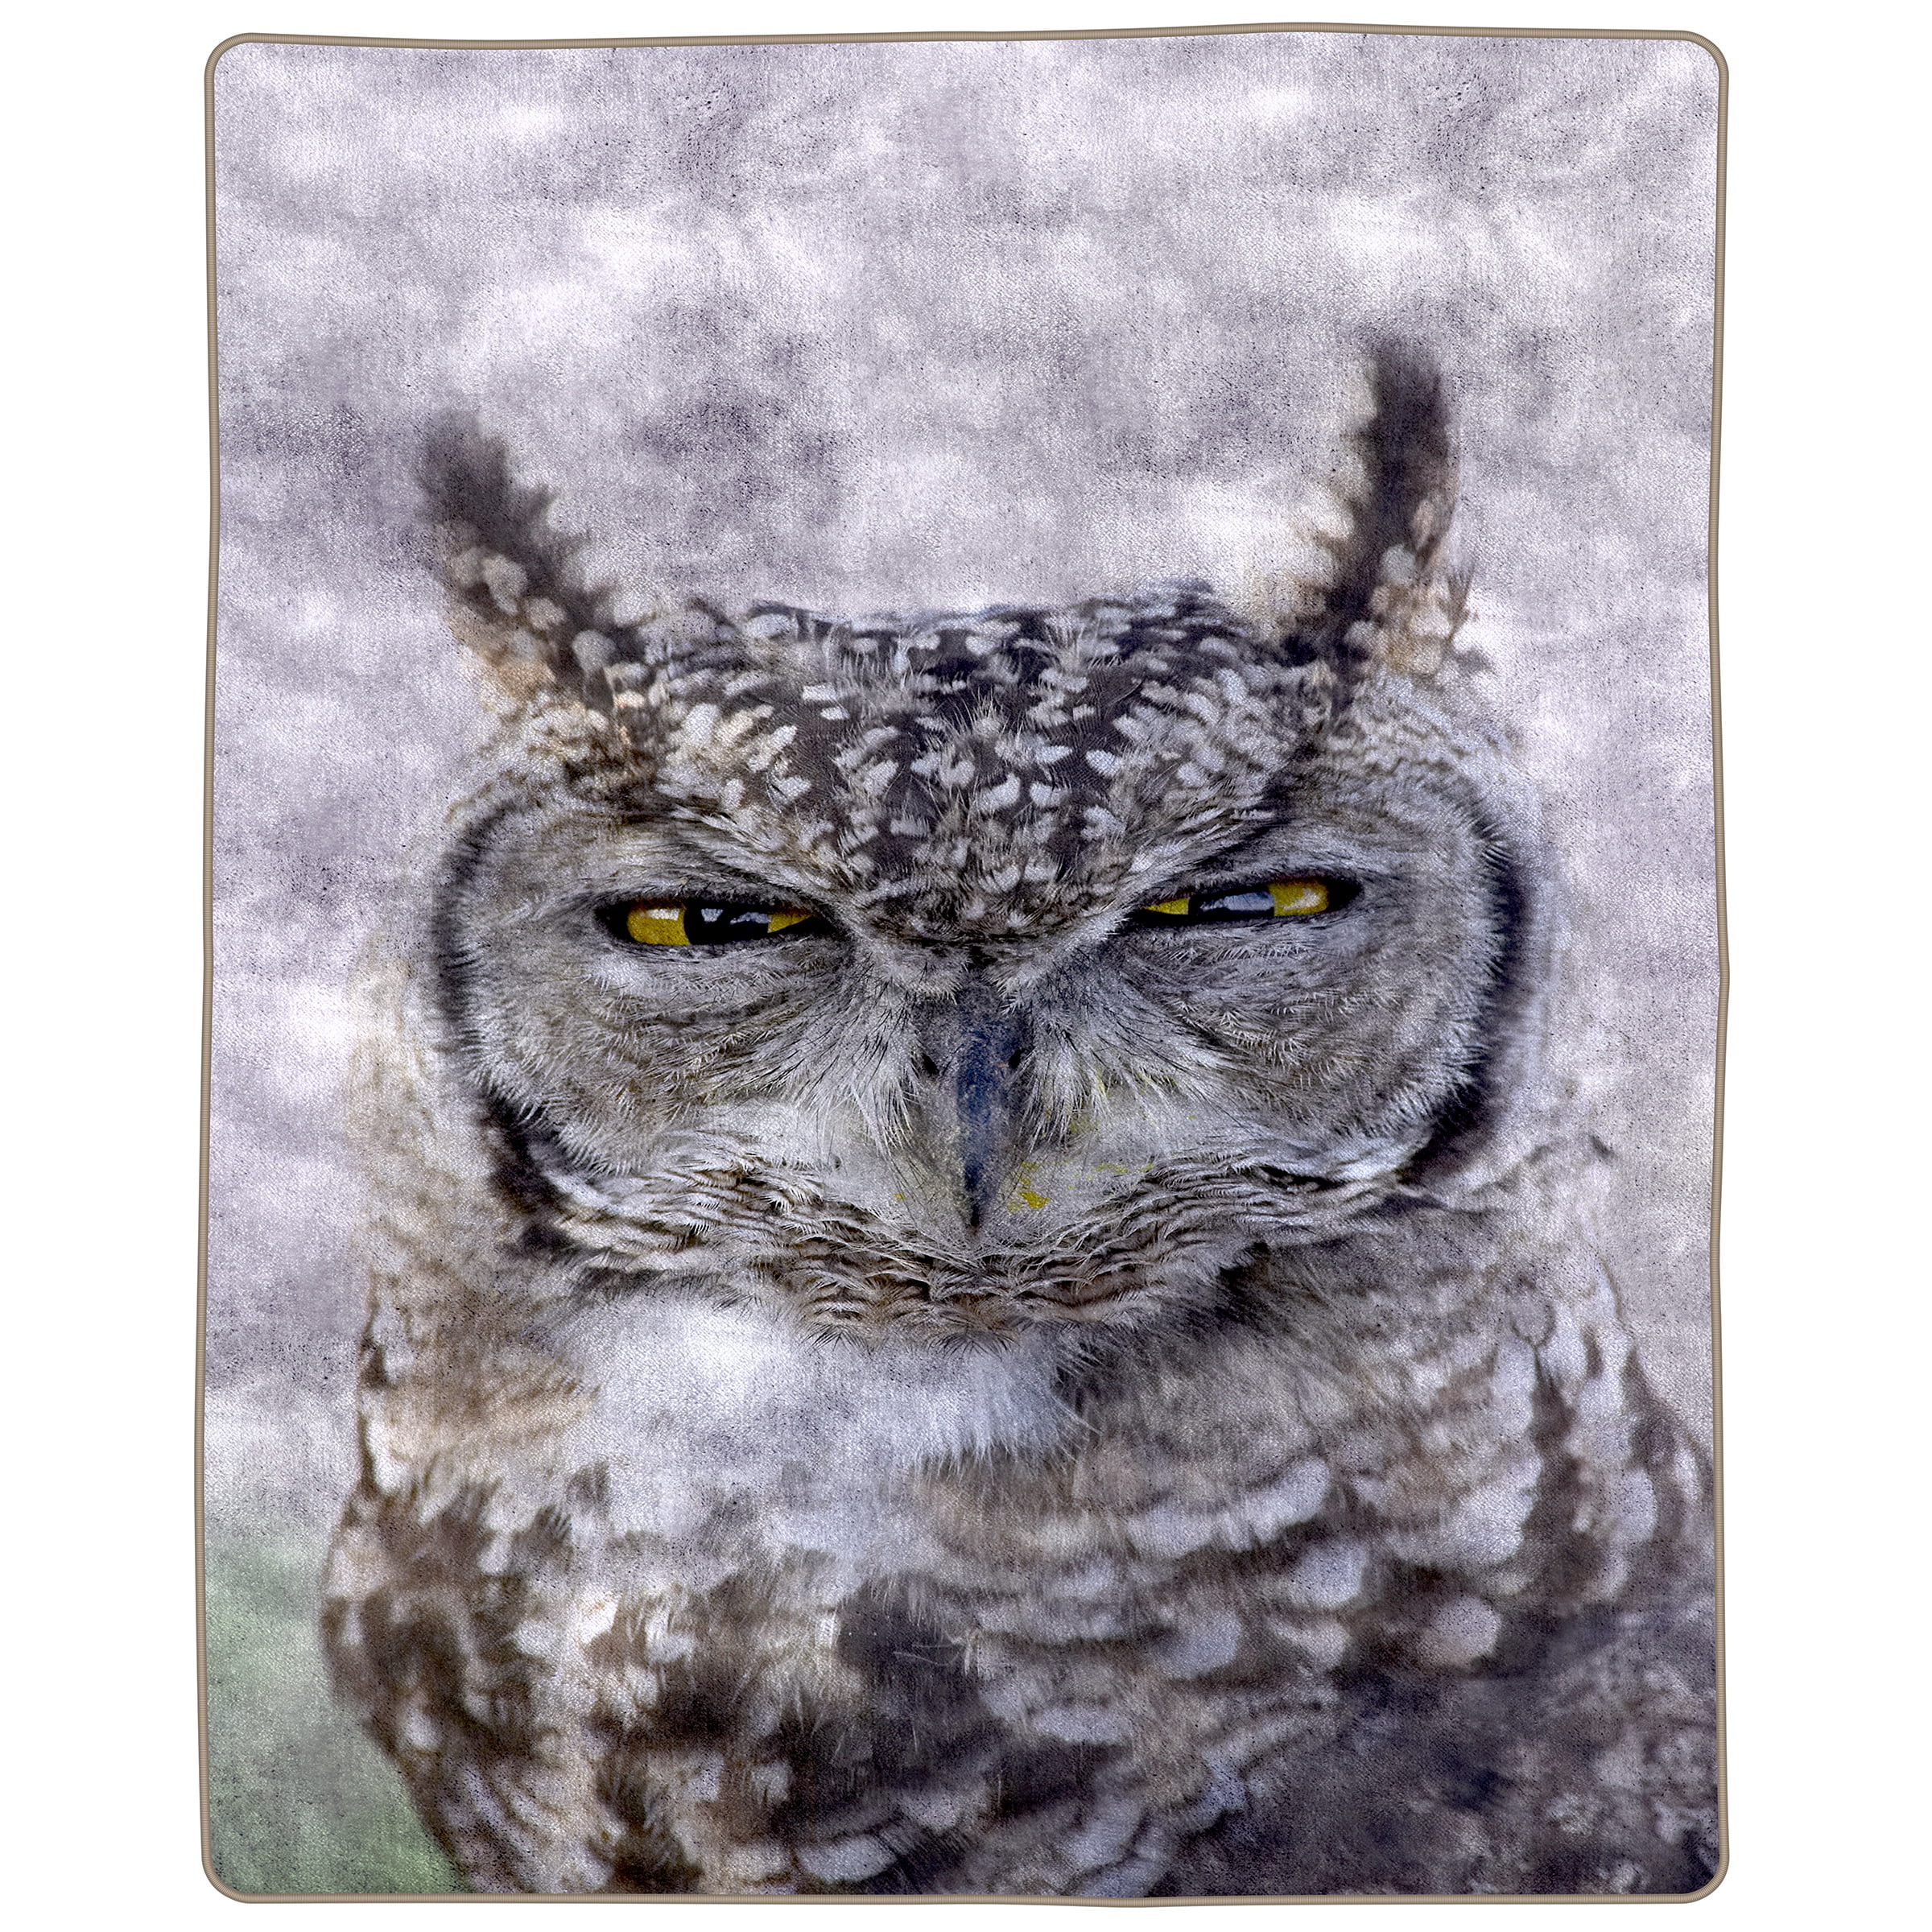 Soft Flannel Fleece Throw Blanket,Owl Art Large Flannel Fleece Blankets for Bed Couch Sofa,All Season Warm Cozy Fuzzy Lightweight Blanket for Hot Sleepers